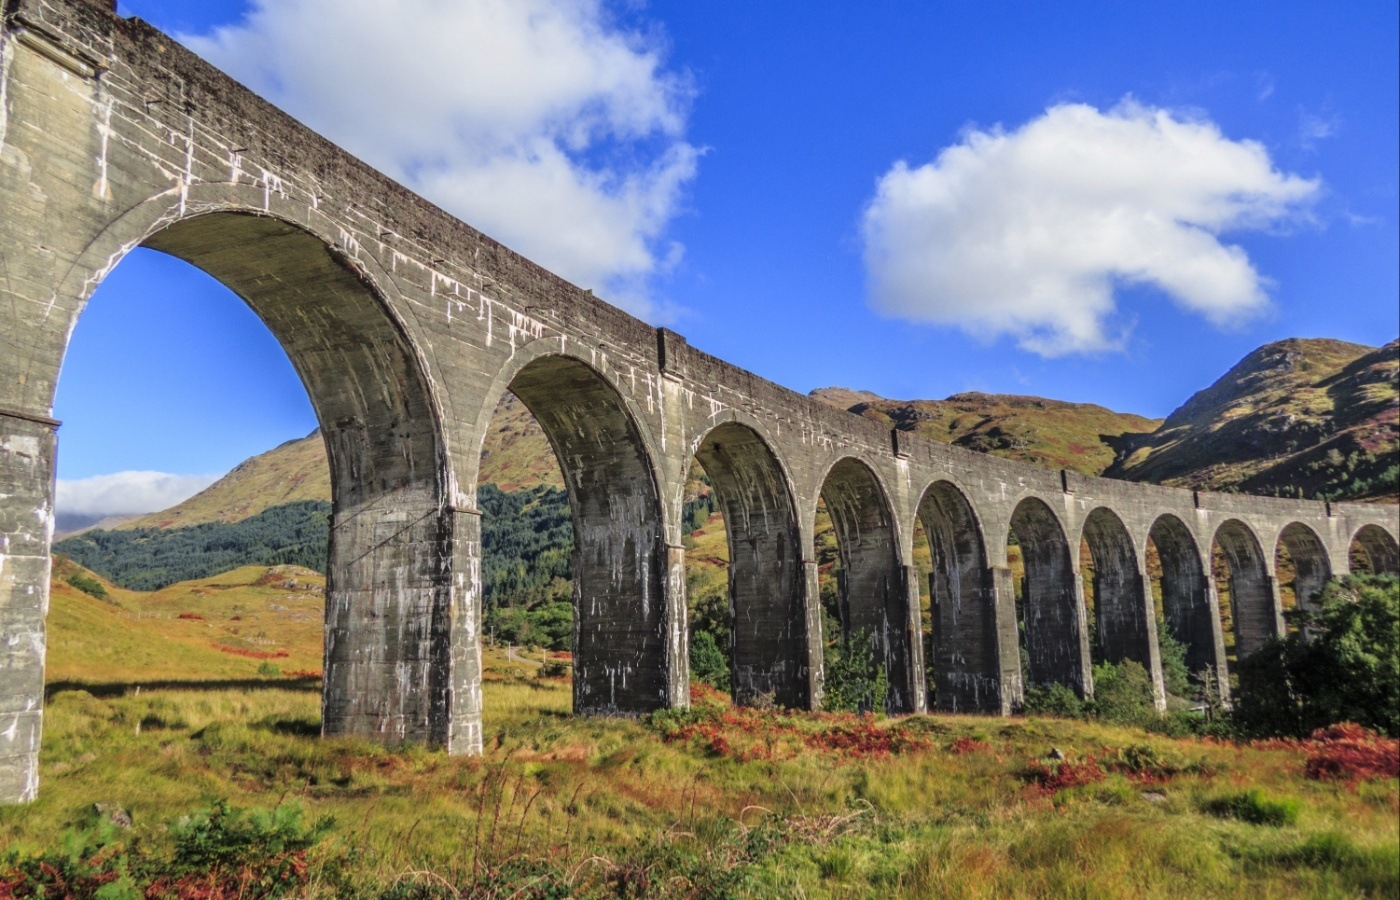 Glenfinnan Viaduct is a railway viaduct on the West Highland Line.